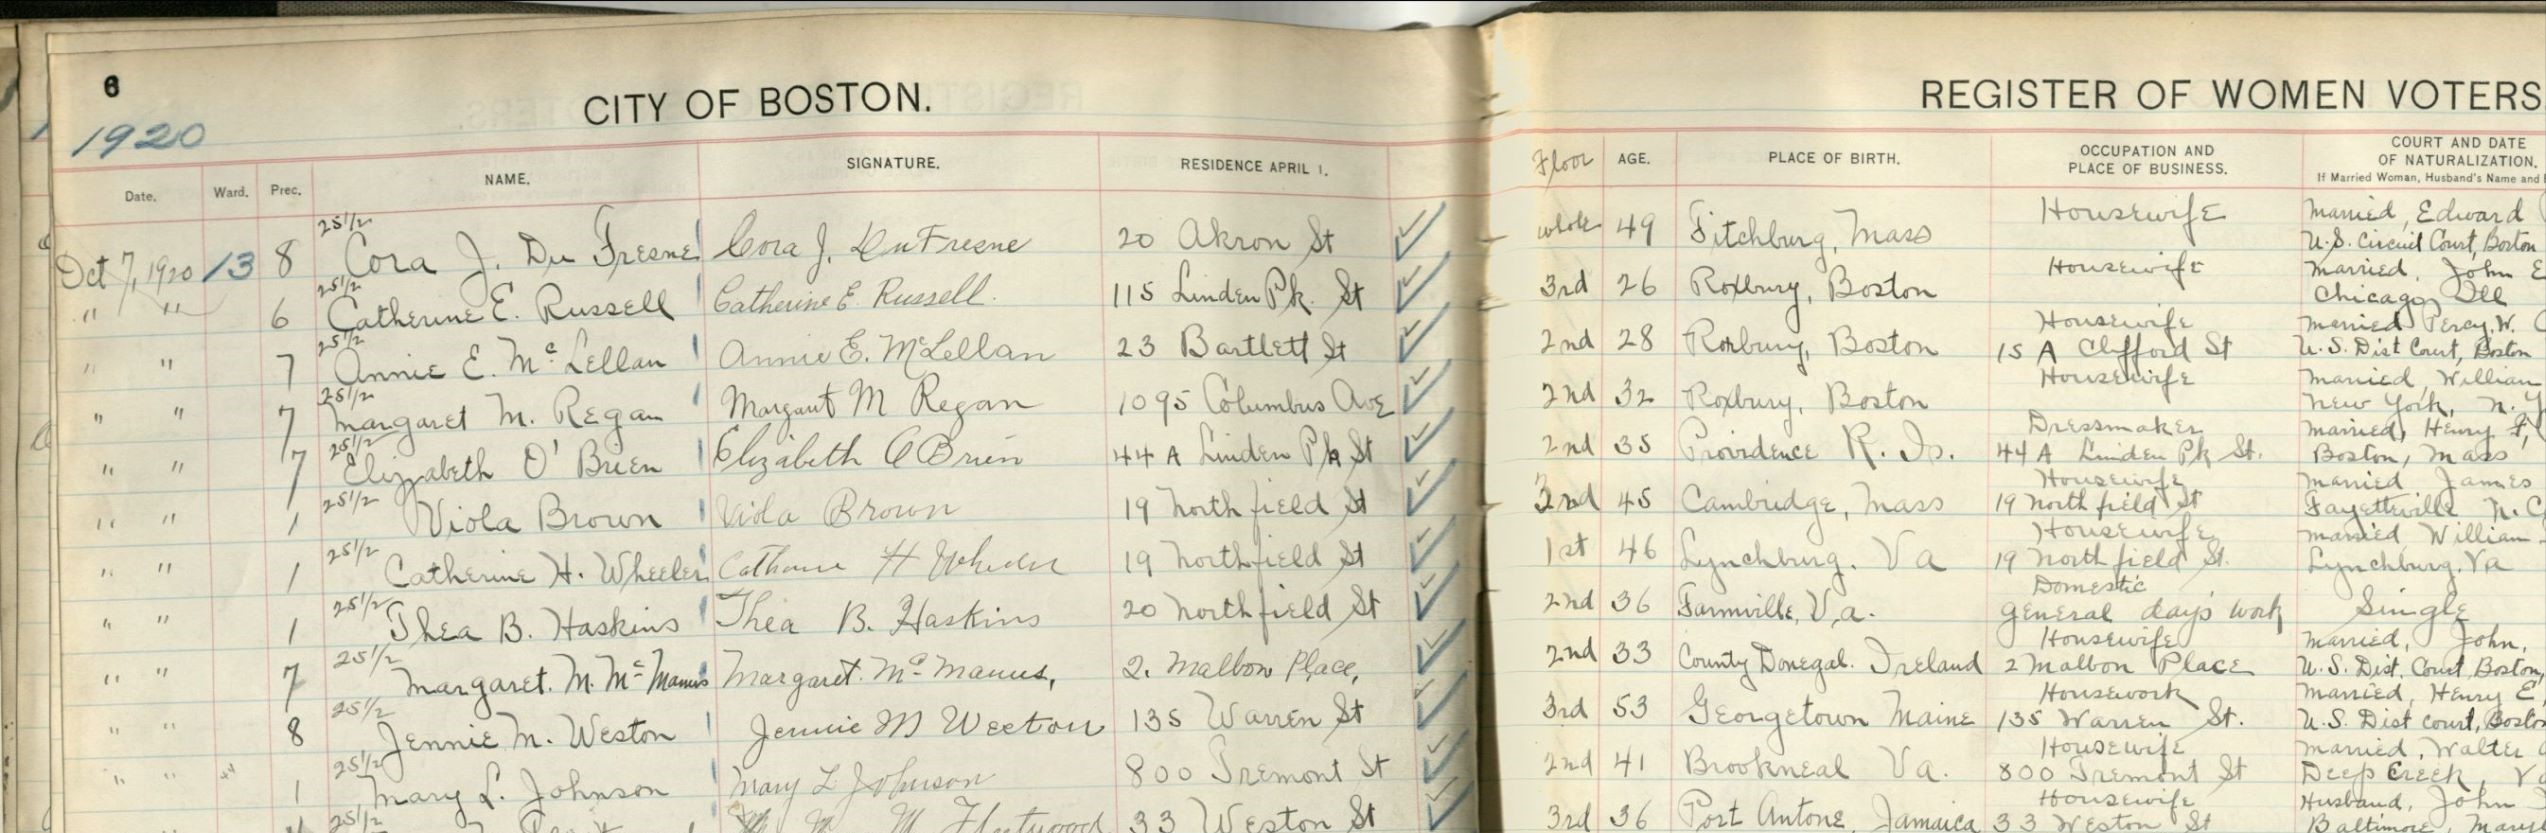 Excerpt from Ward 13 of General Register of Women Voters showing entry for Mary L. Johnson, 1920, Boston City Archives